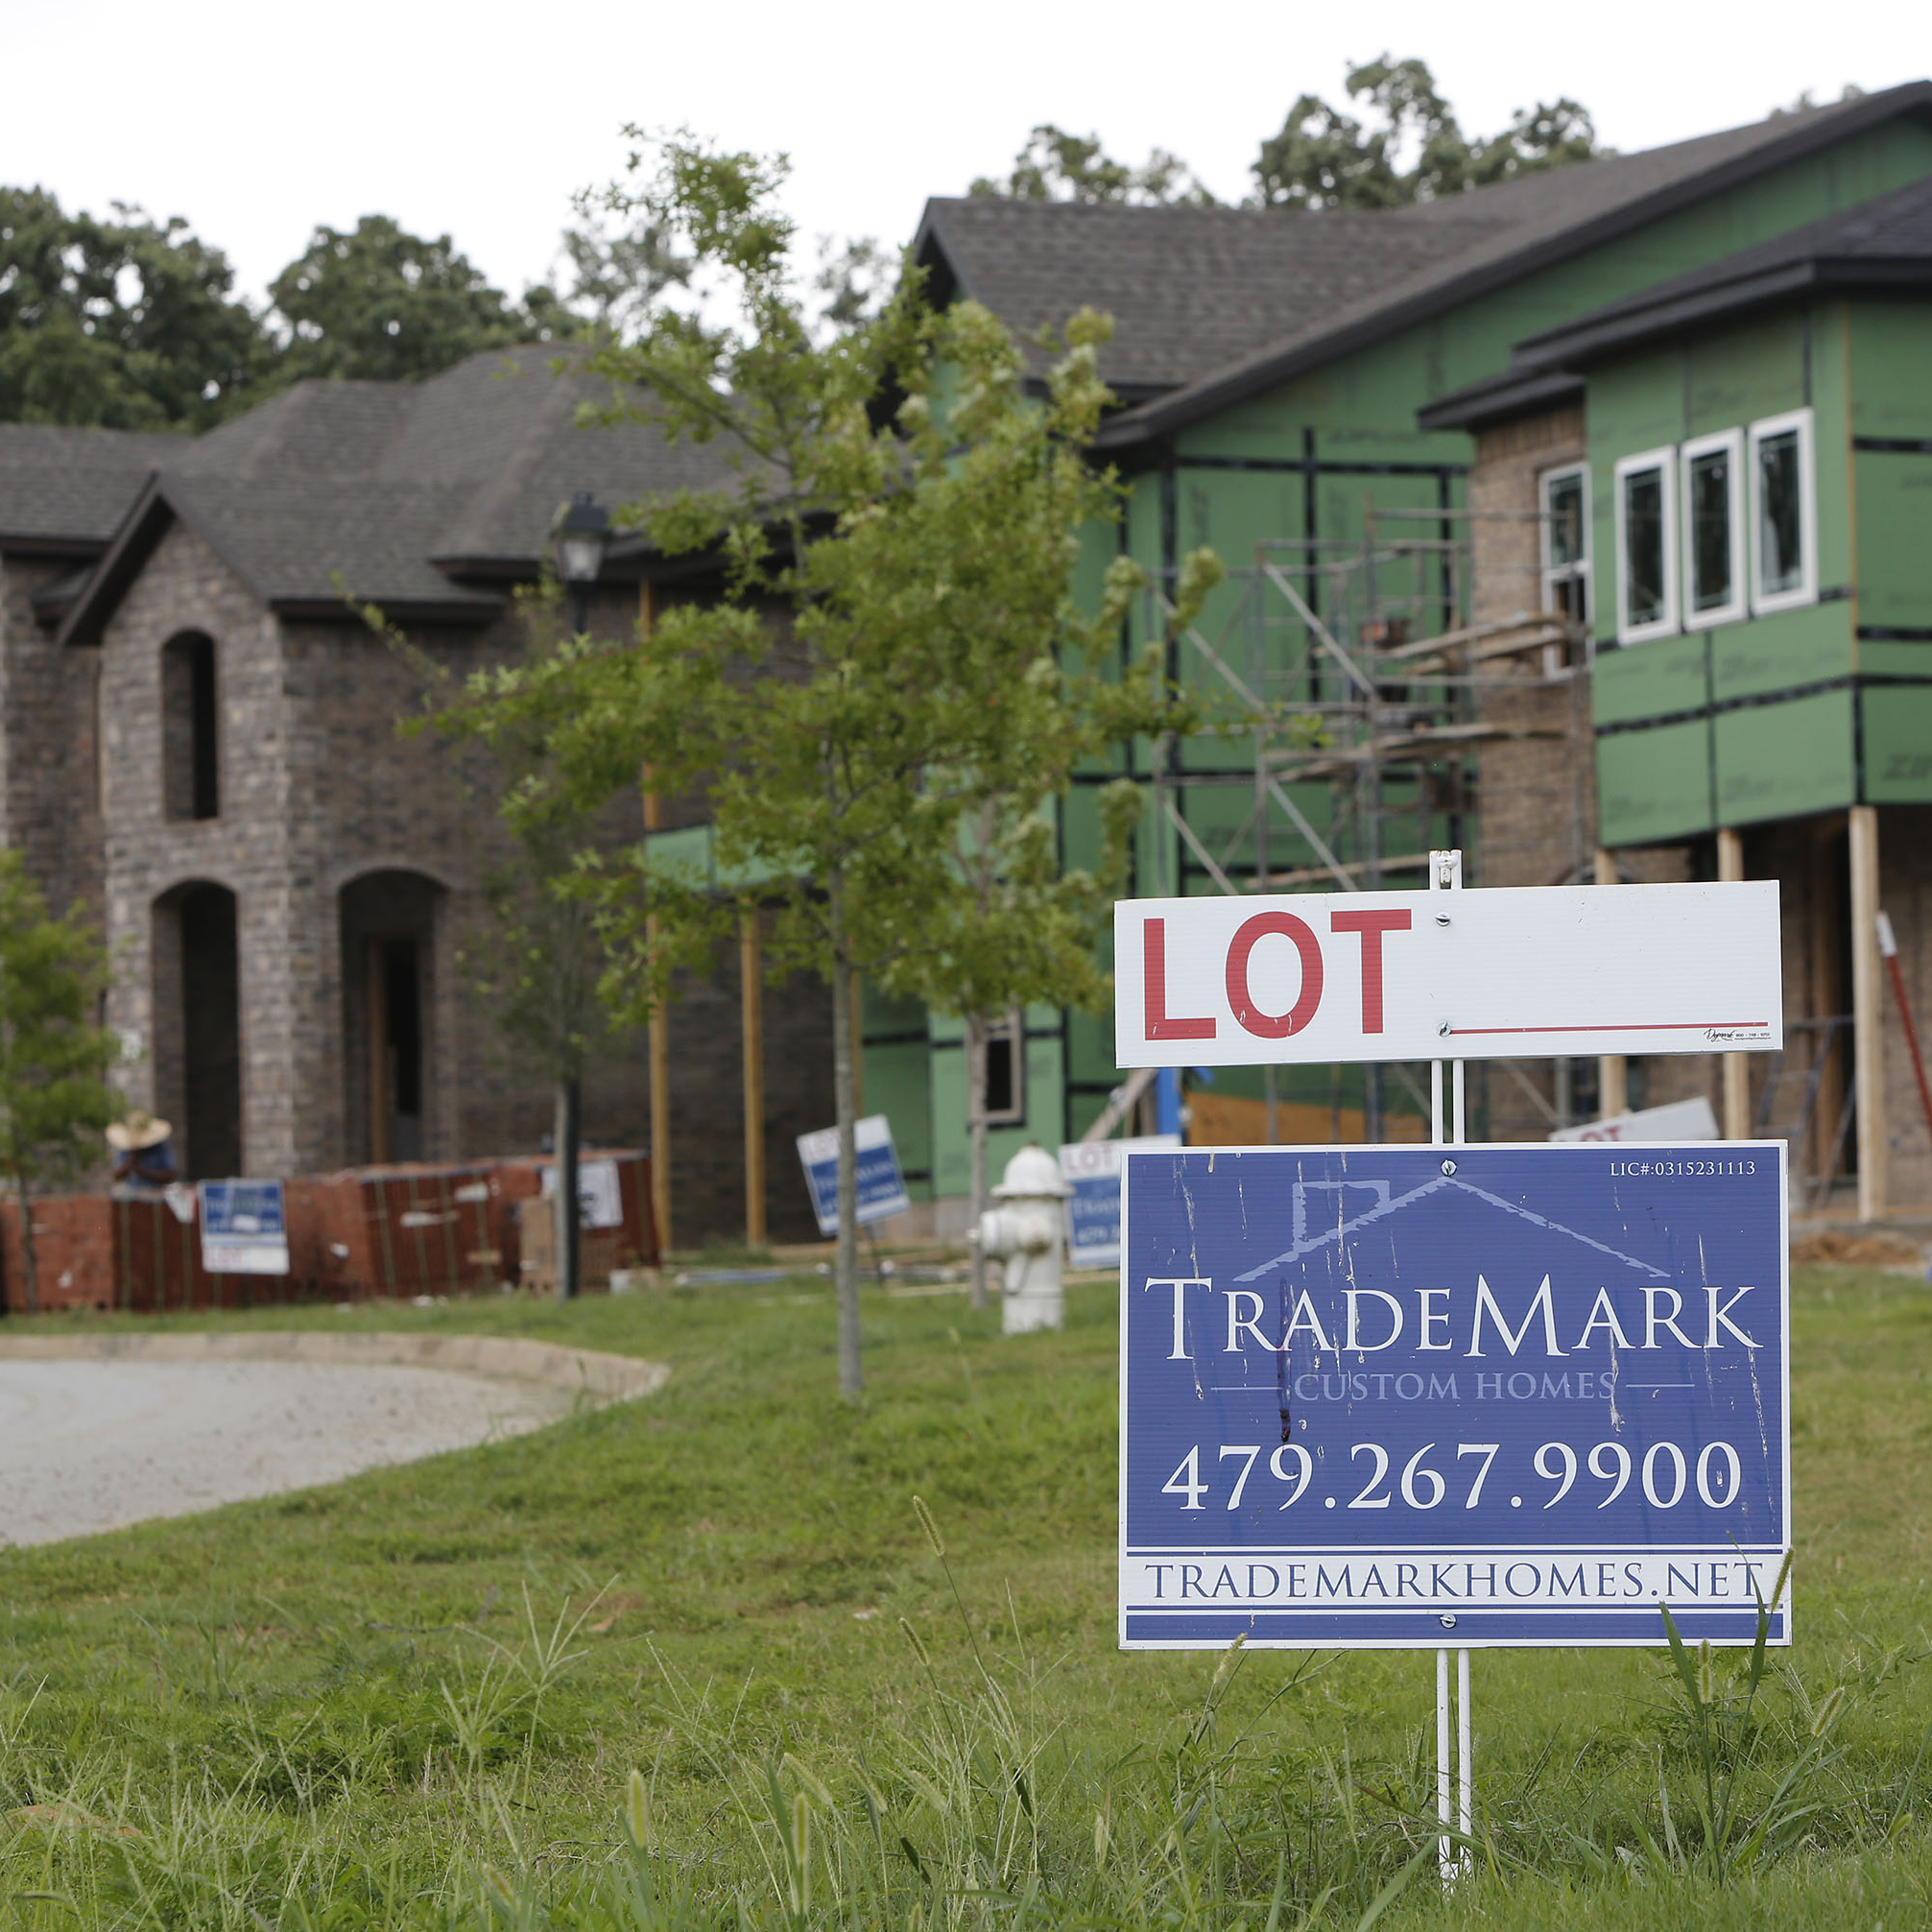 Know the News - Addressing the lack of affordable housing in Northwest Arkansas